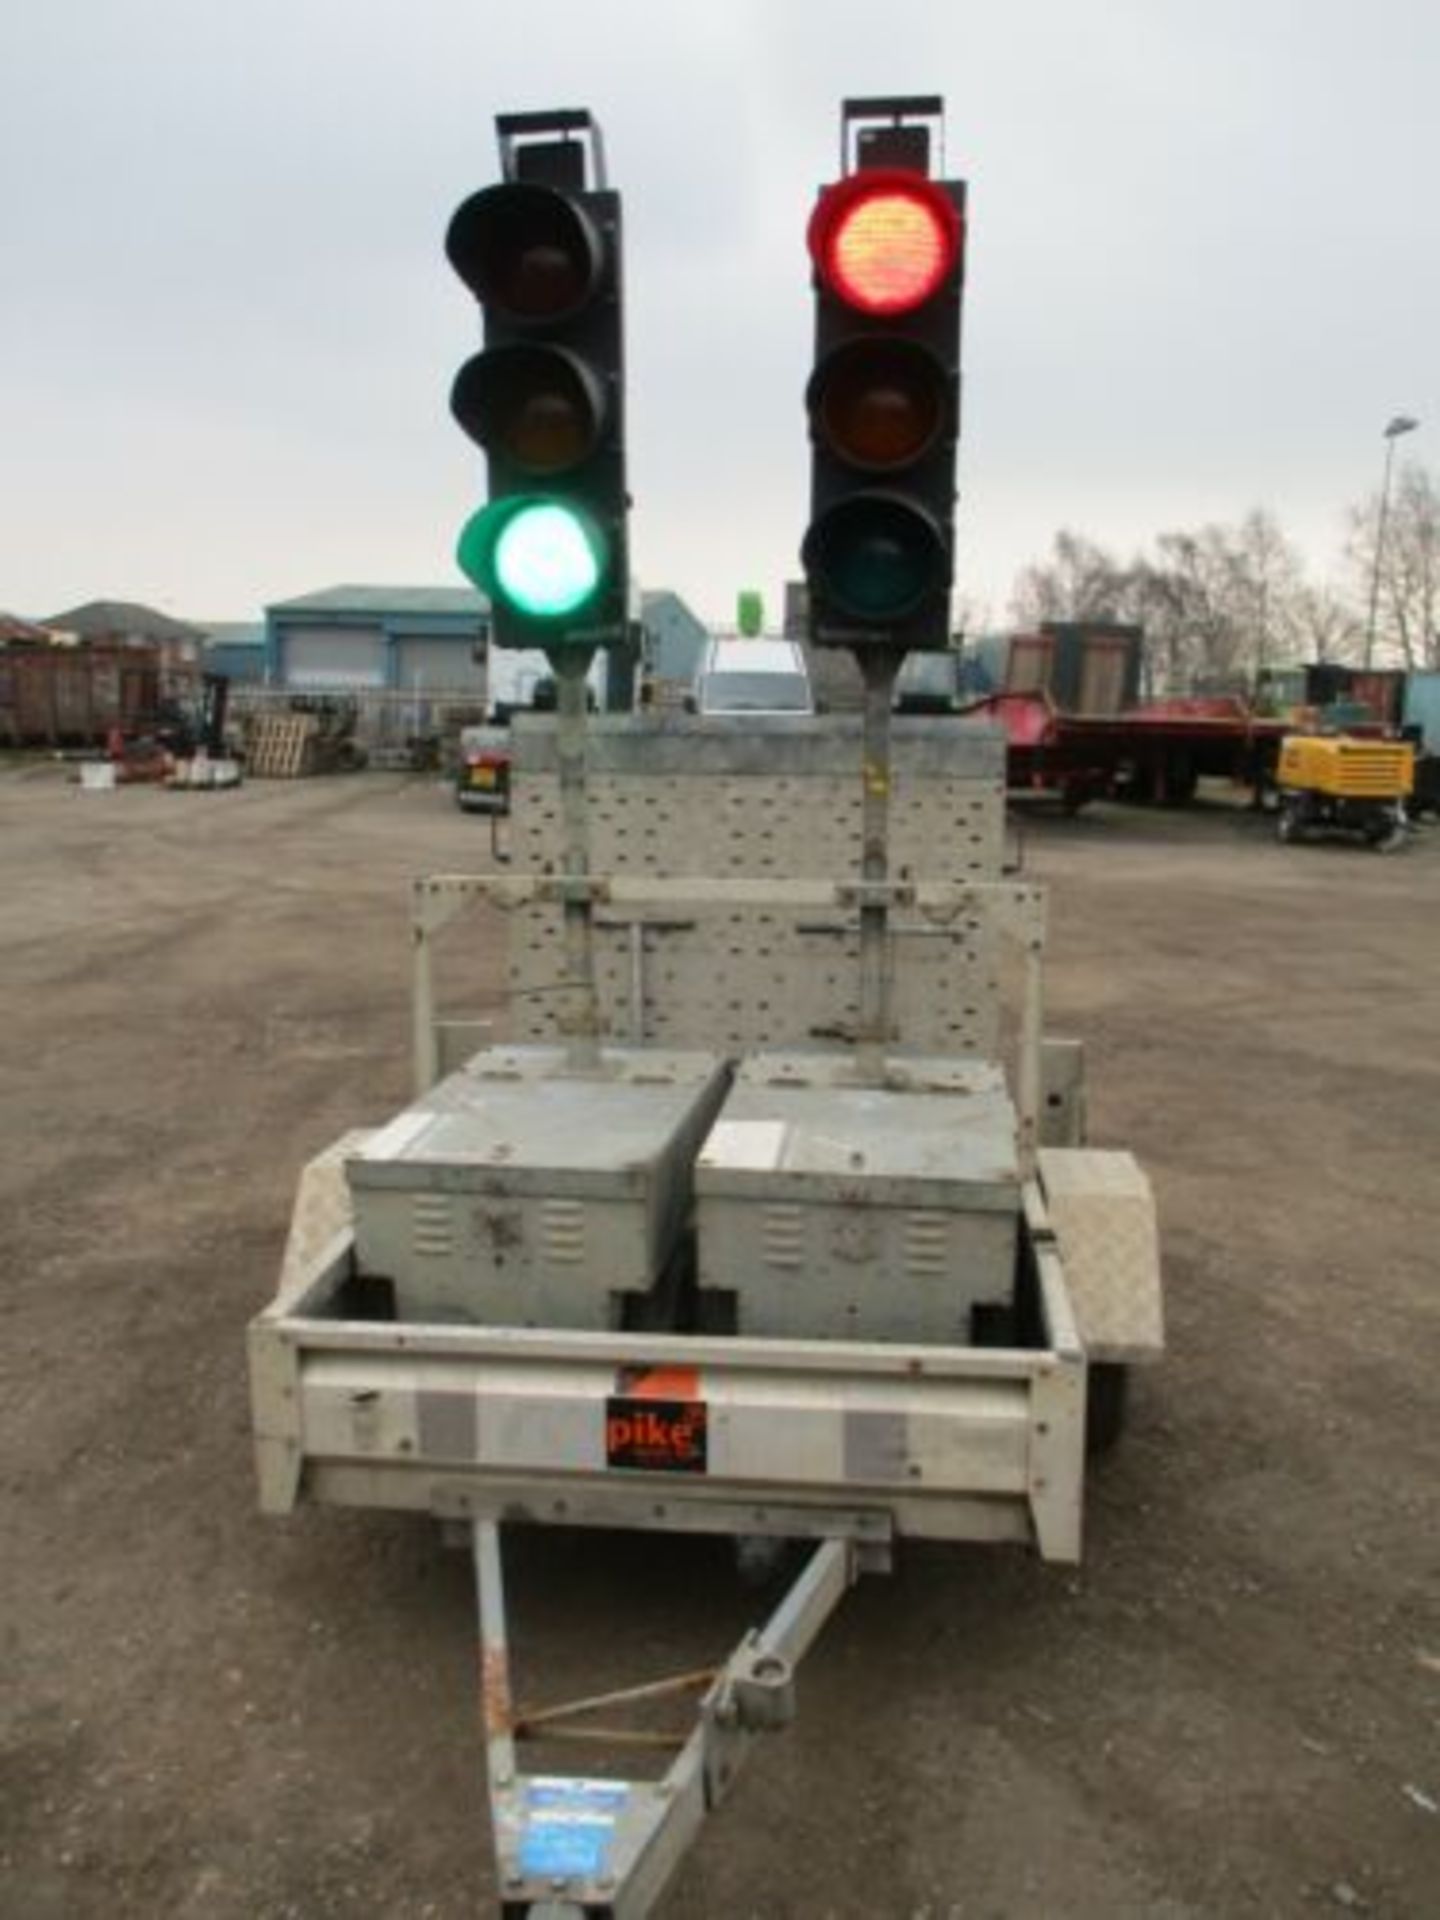 PIKE TRAFFIC LIGHTS RADIO LIGHT BATTERY 2 WAY DELIVERY ARRANGED - Image 5 of 8